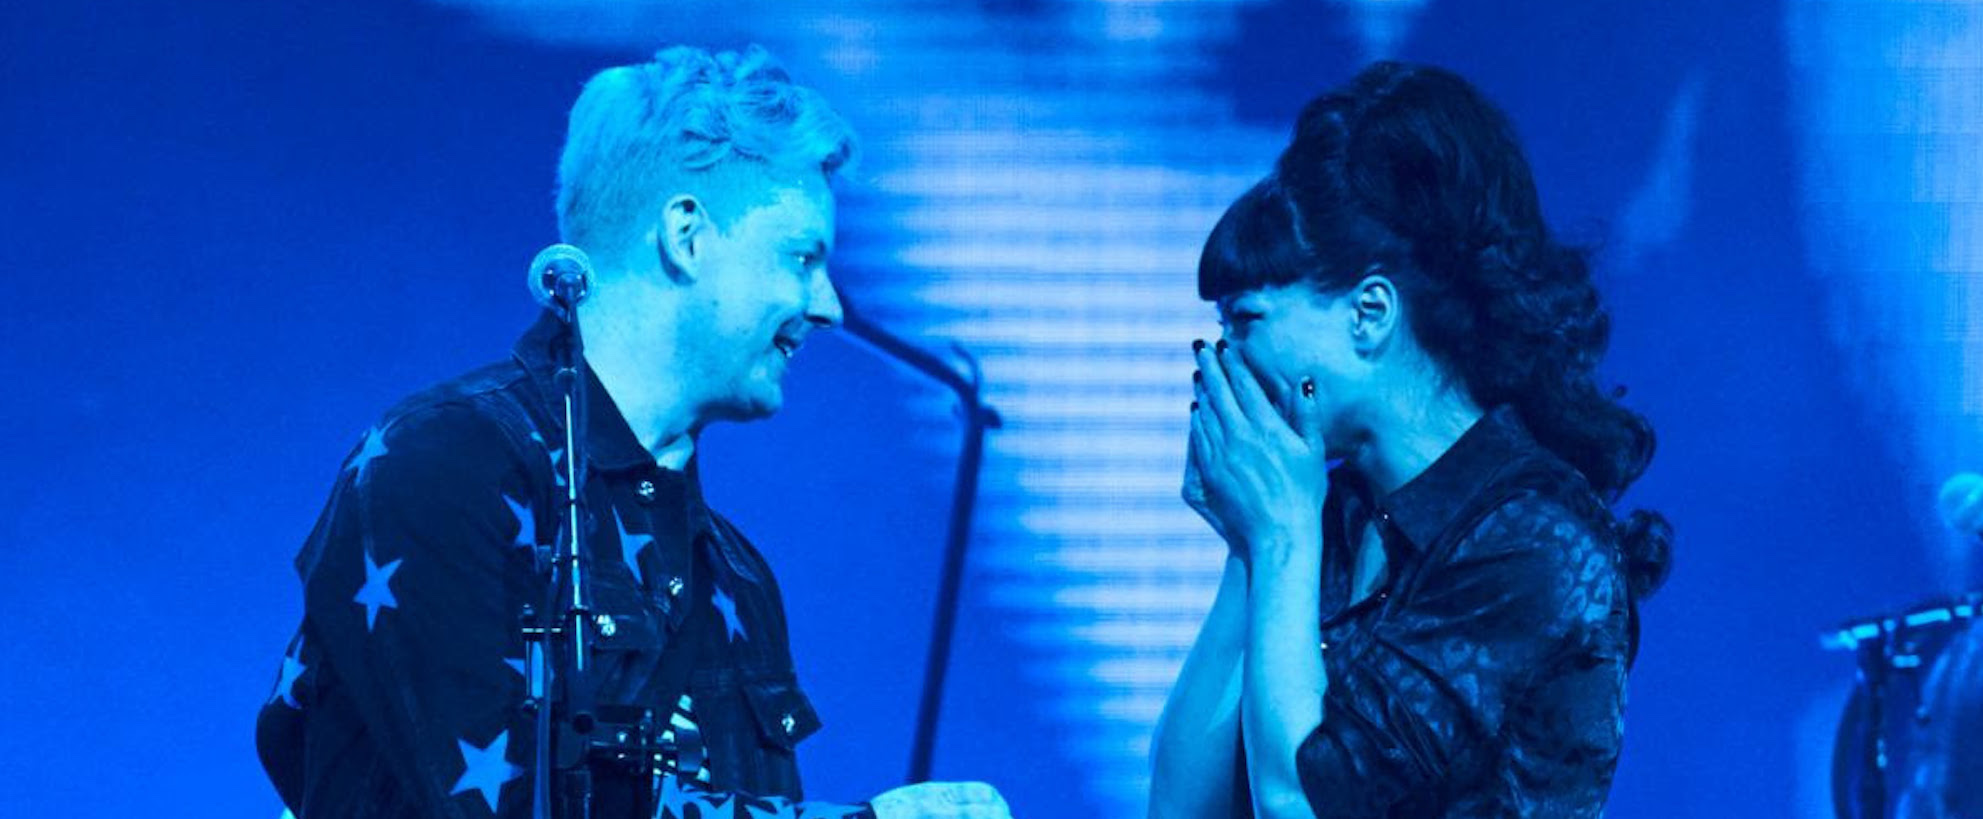 Jack White Proposes, Then Gets Married During Detroit Concert